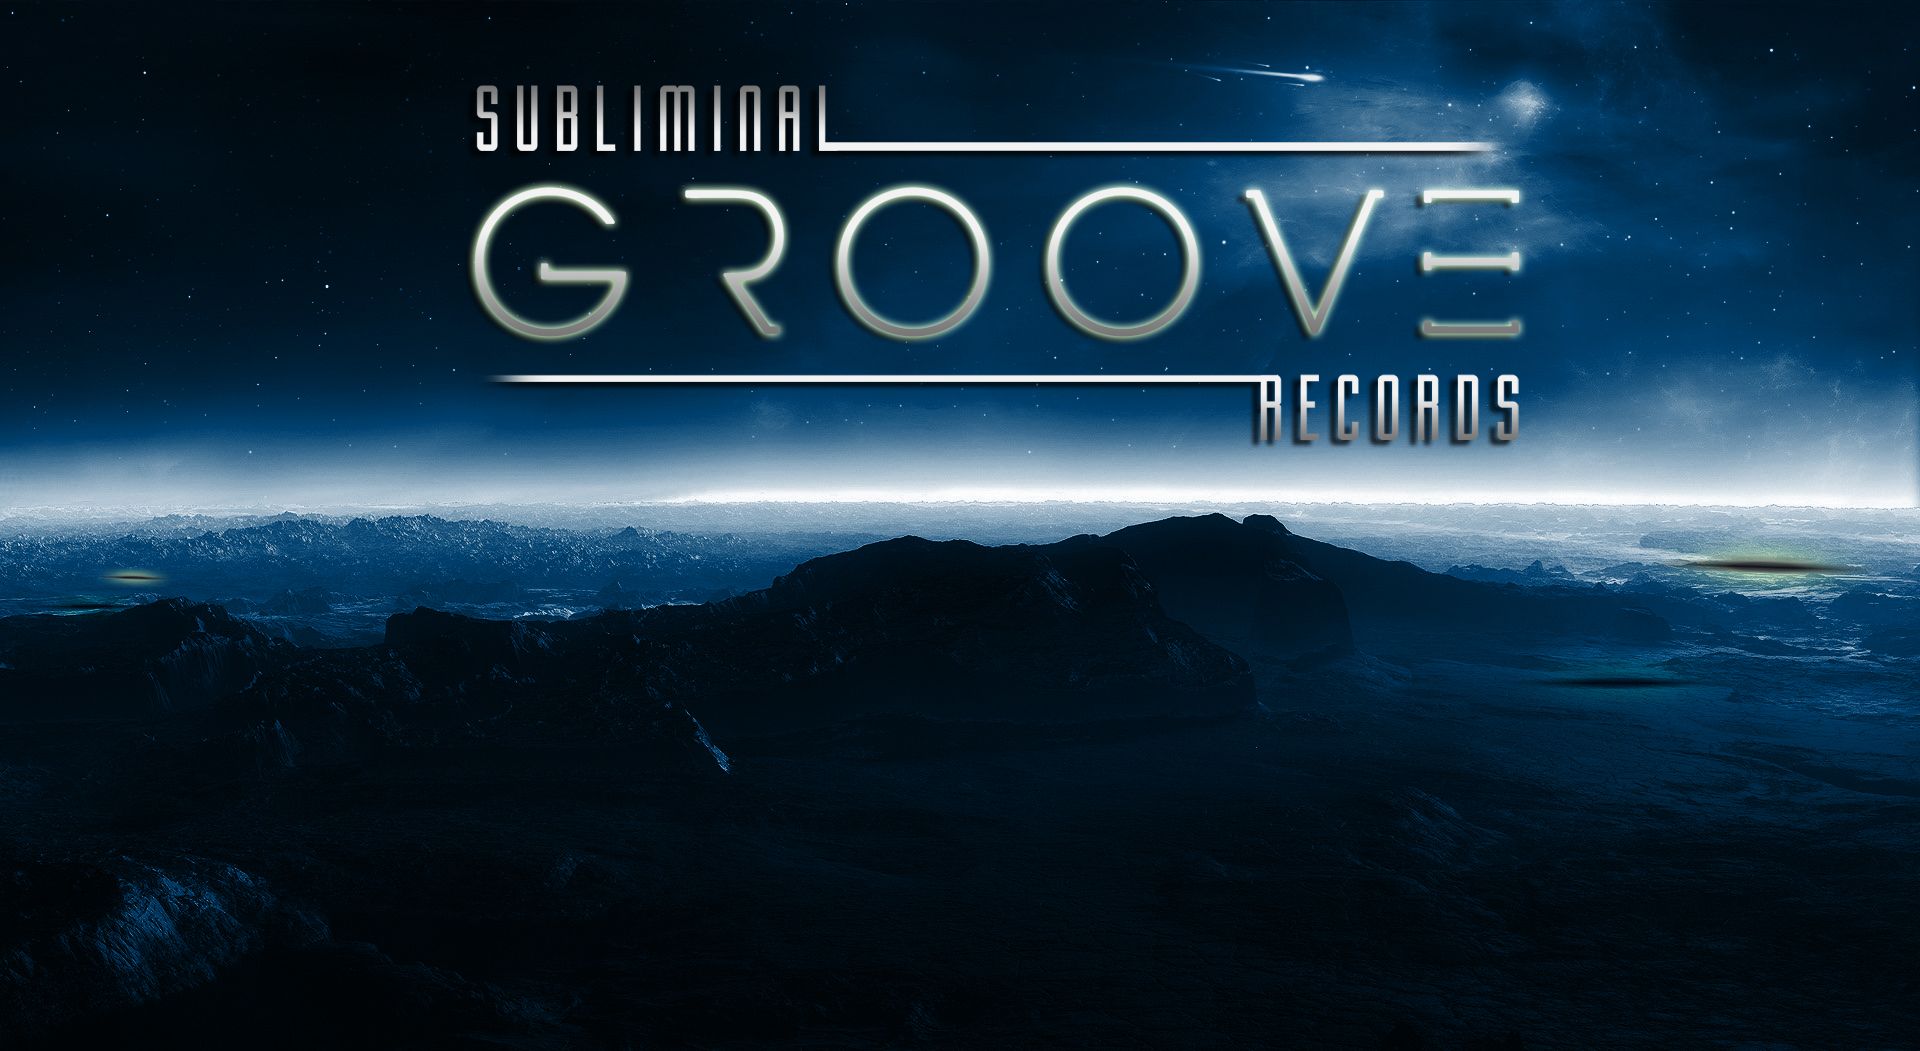 ABOUT SUBLIMINAL GROOVE RECORDS